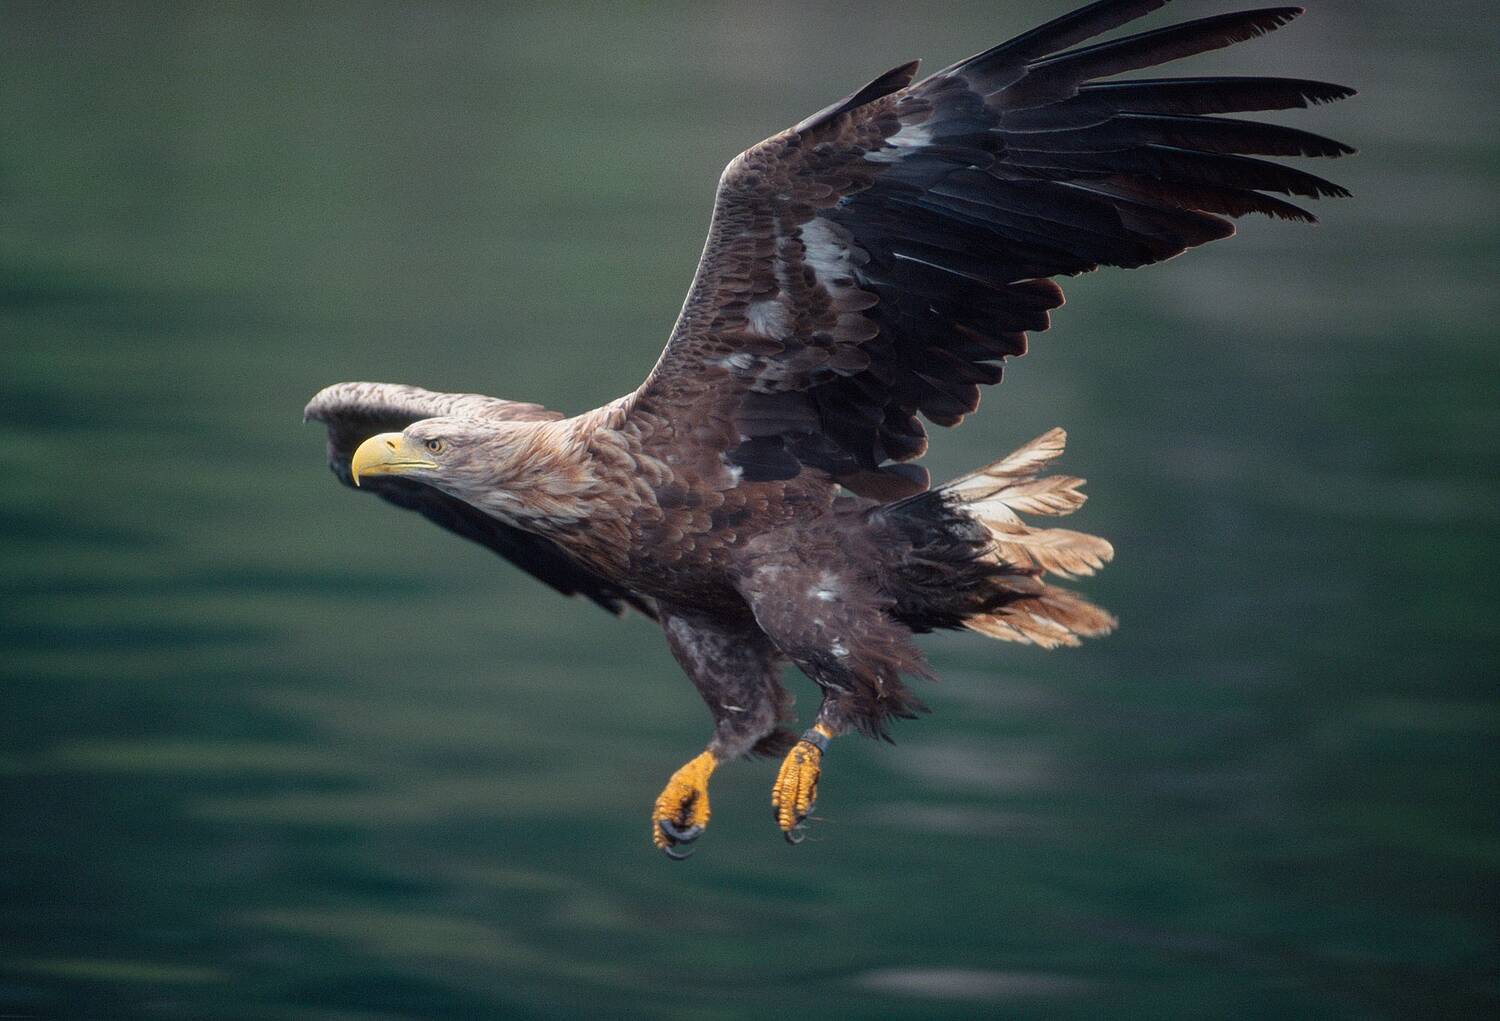 A close-up view of a large eagle, swooping over water to land. Its wings are spread wide and its yellow talons are clutched beneath it.